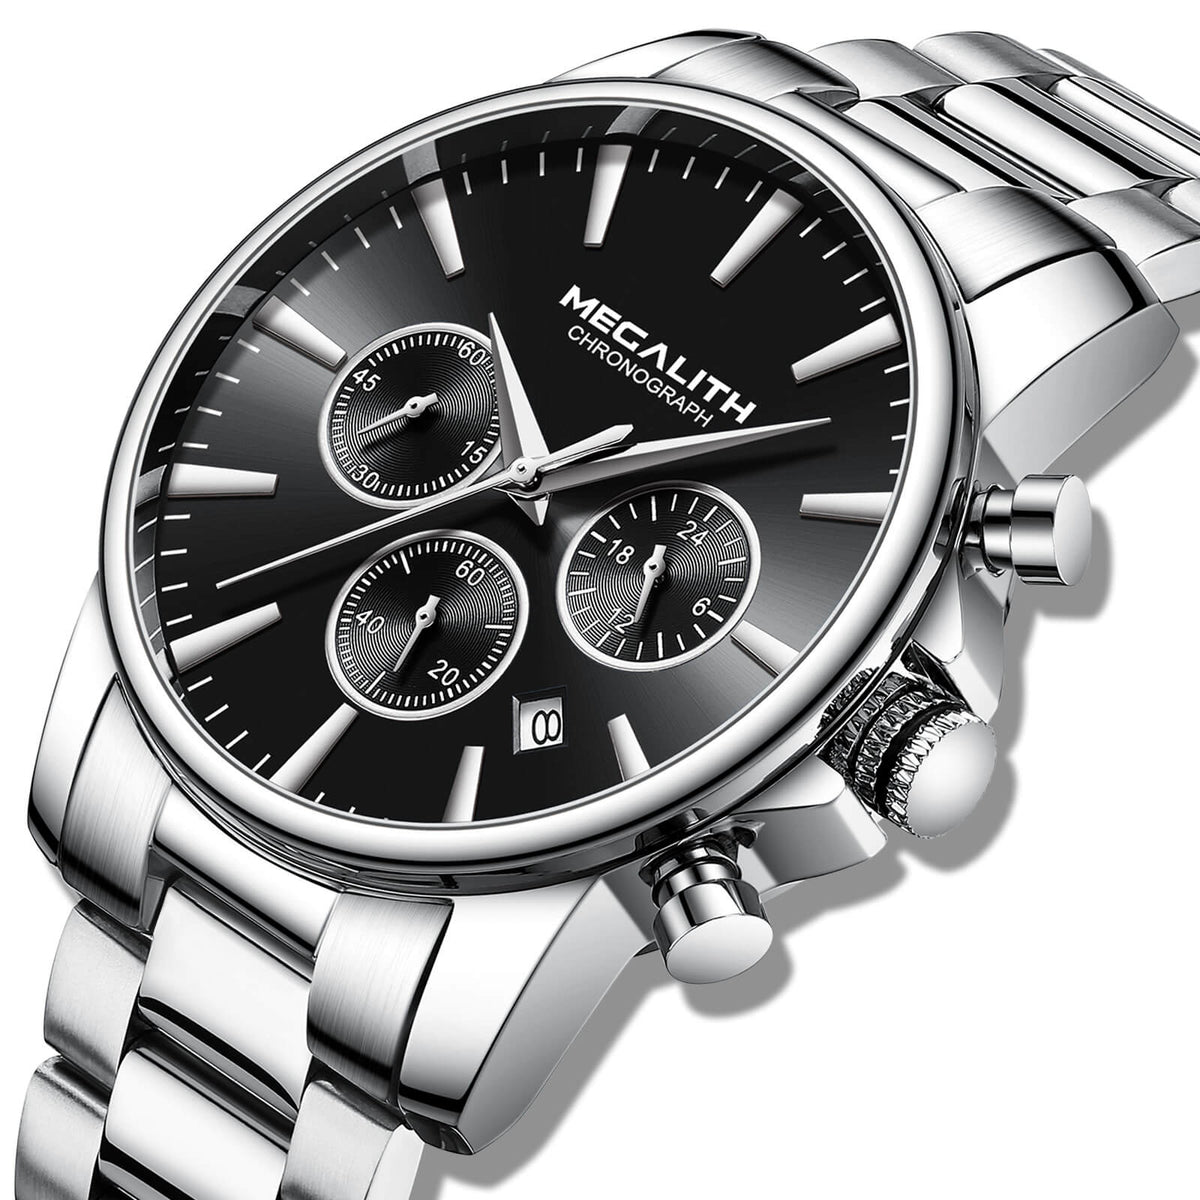 Chronograph Watch | Stainless Steel Band | 8264M – megalith watch